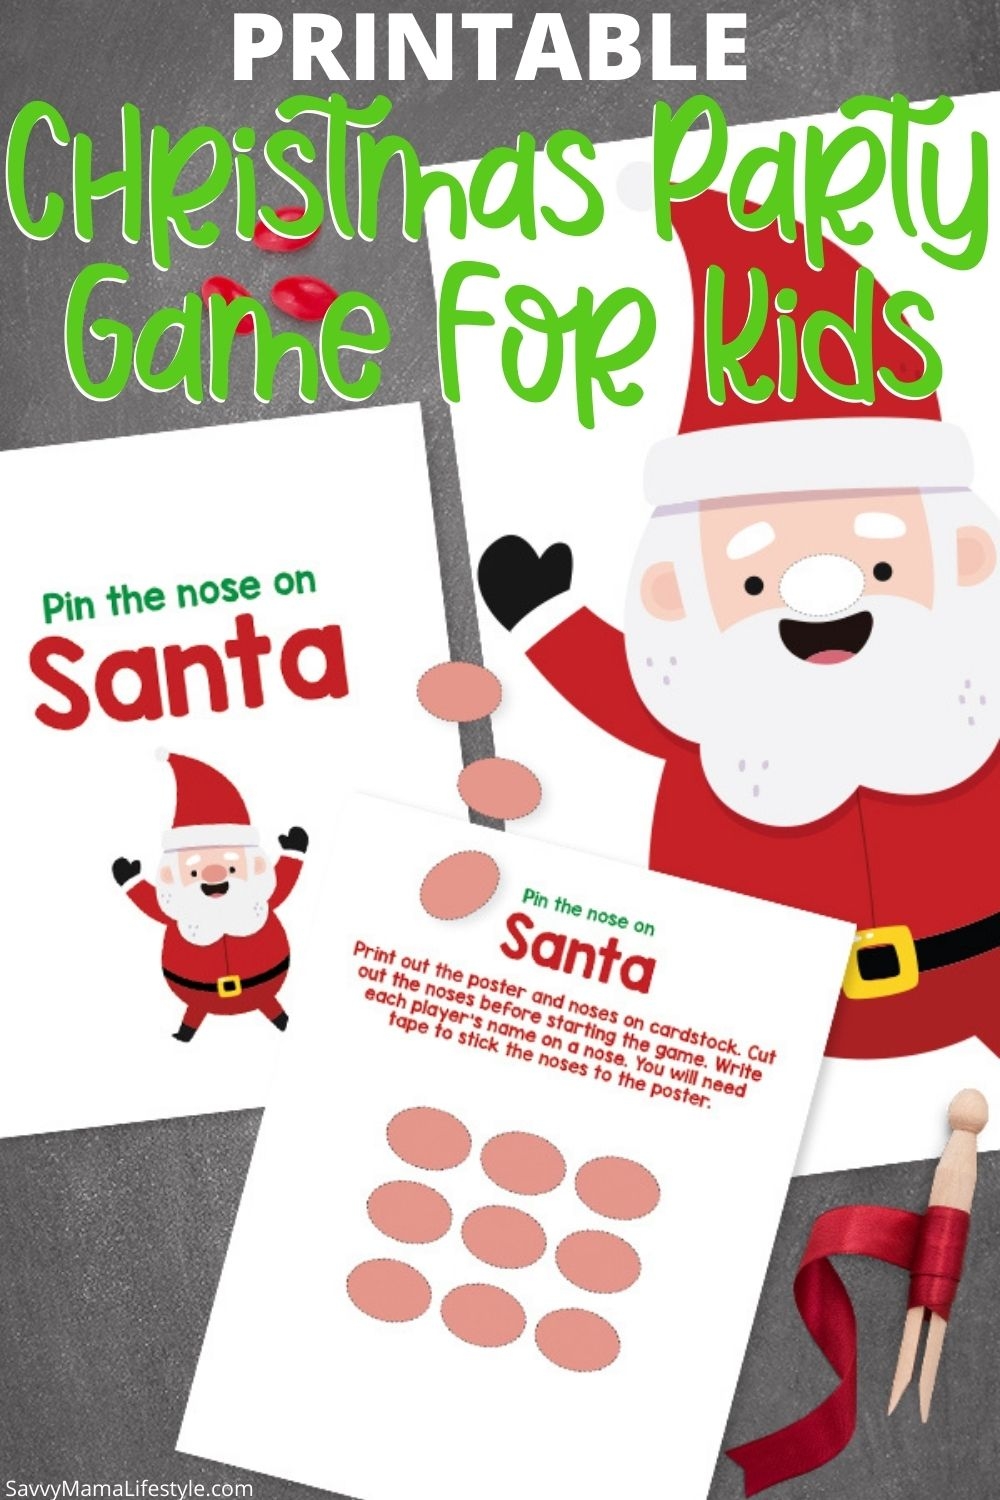 Christmas Games Holiday Pin The Nose on The Reindeer Kids Reusable Christmas Games Poster Xmas Activities Christmas Pin the Nose Game with 24 Reindeer Nose and 6 Eye Masks for Adults Fresh Style 